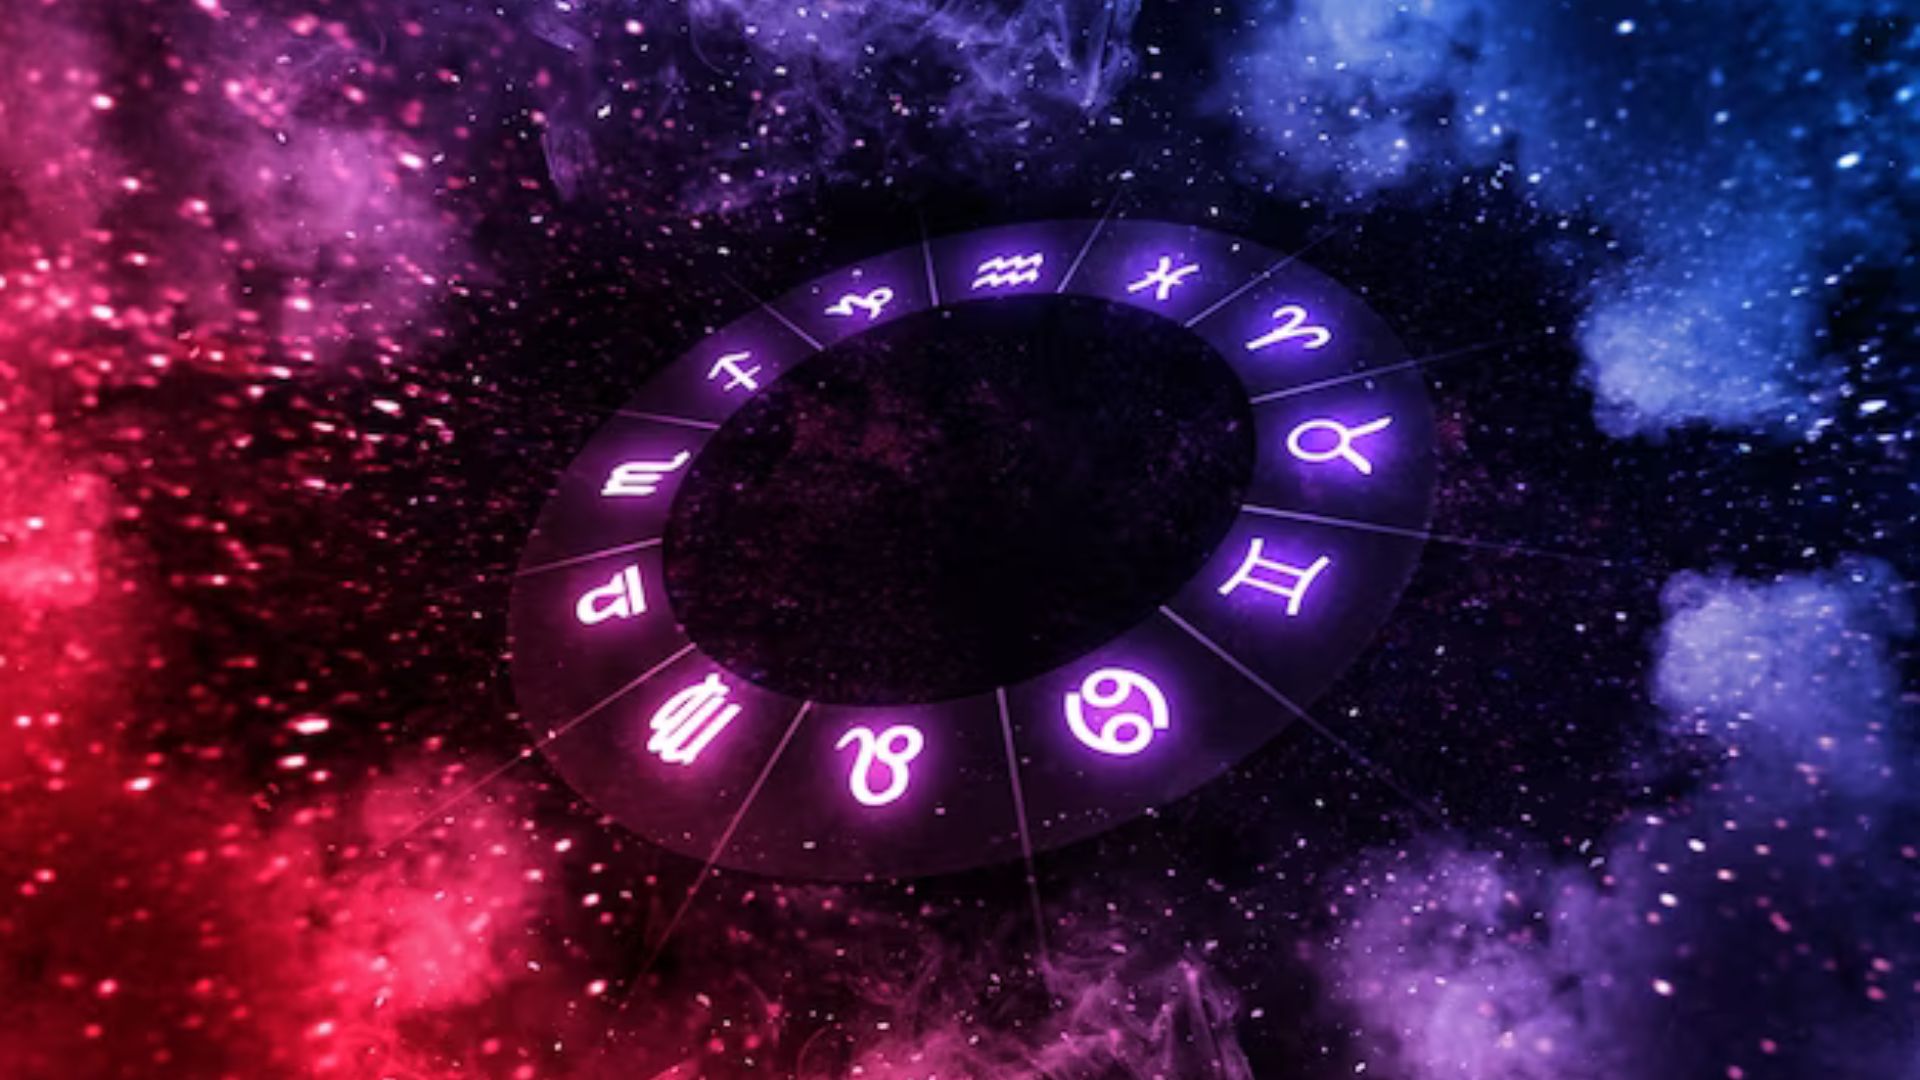 Zodiac Signs In Circle With Stars In The Background